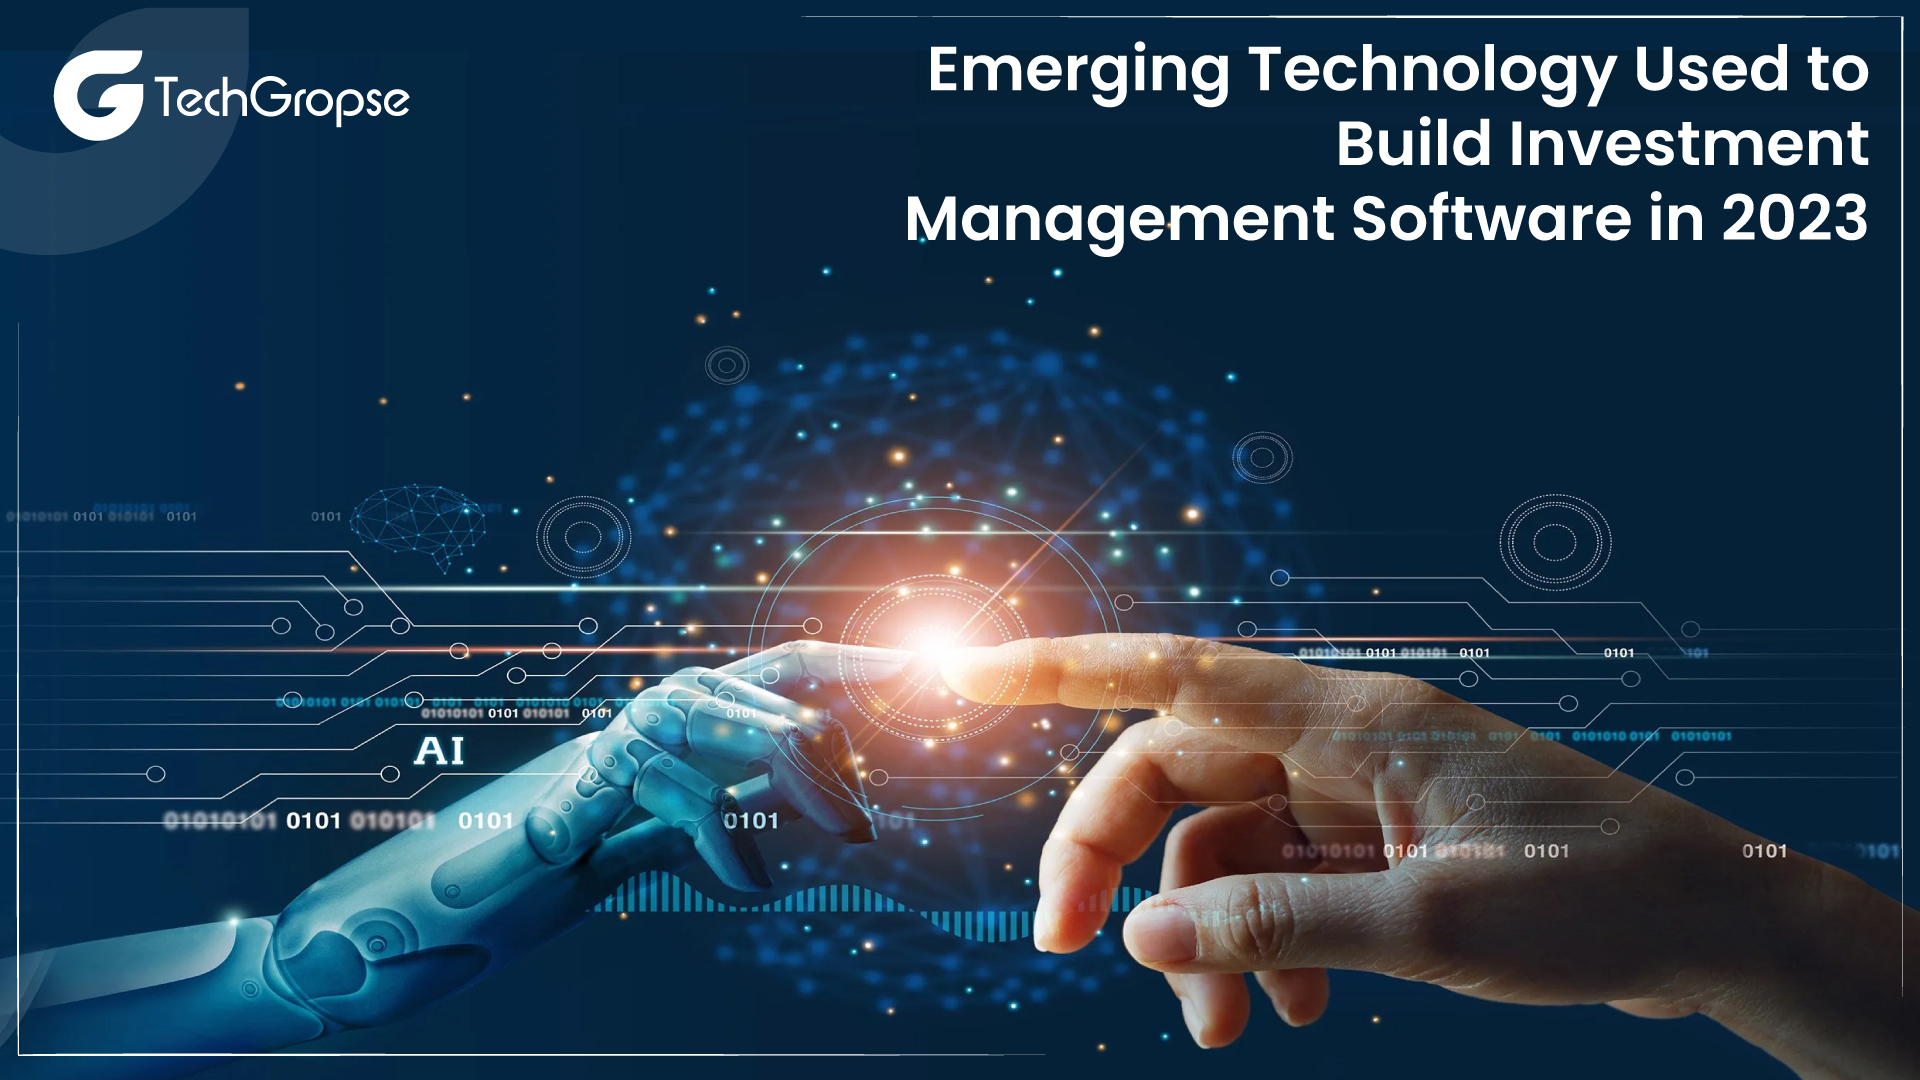 Emerging Technology Used to Build Investment Management Software in 2023